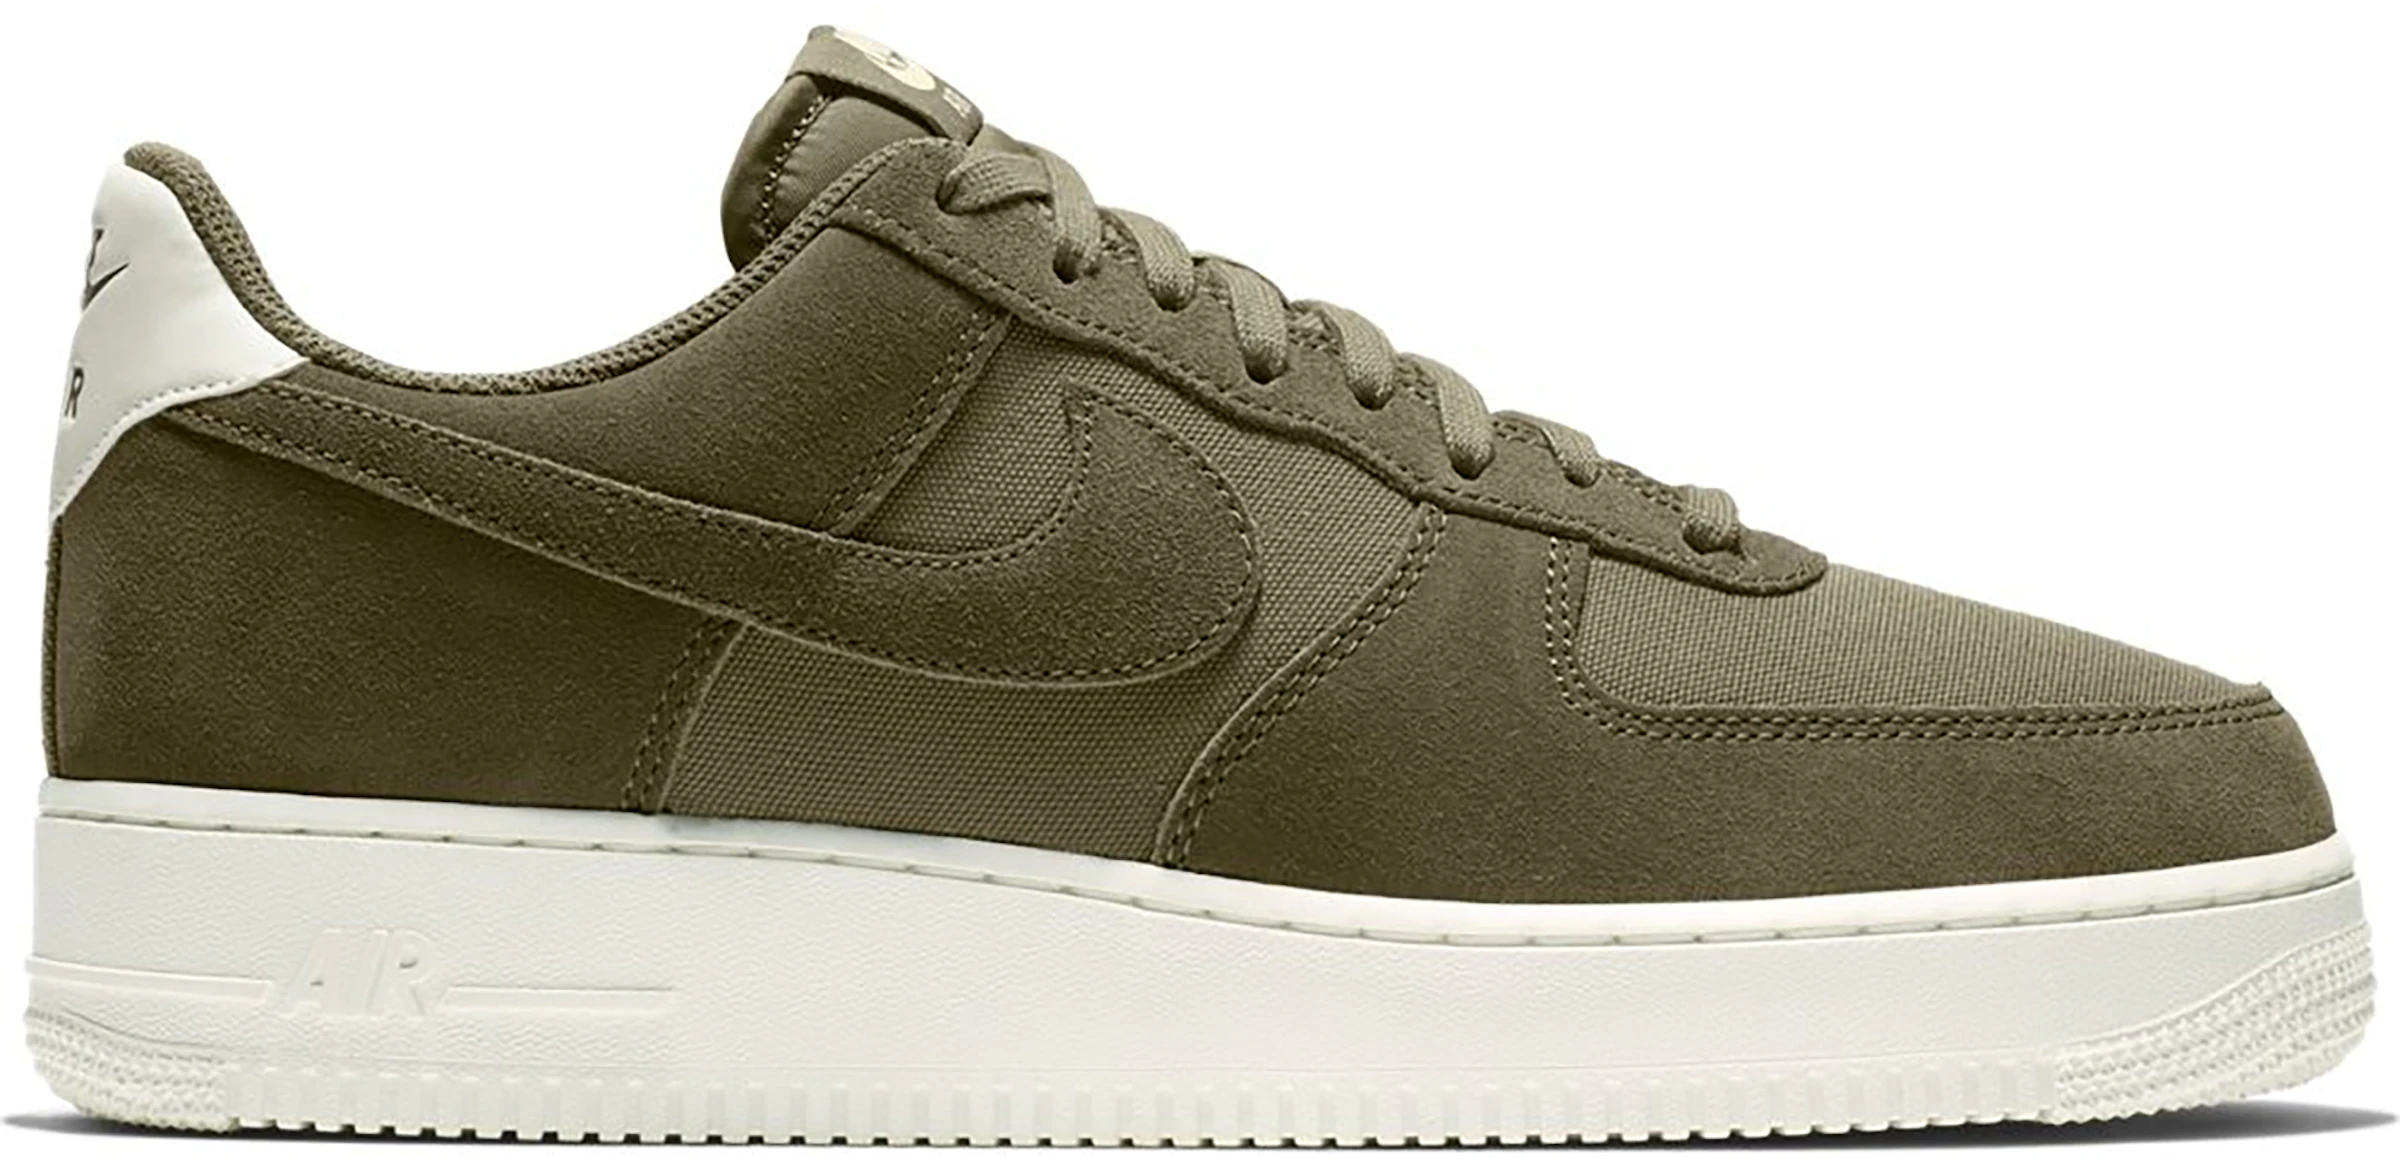 Nike Air Force 1 Low Suede Olive - AO3835-200 - ES